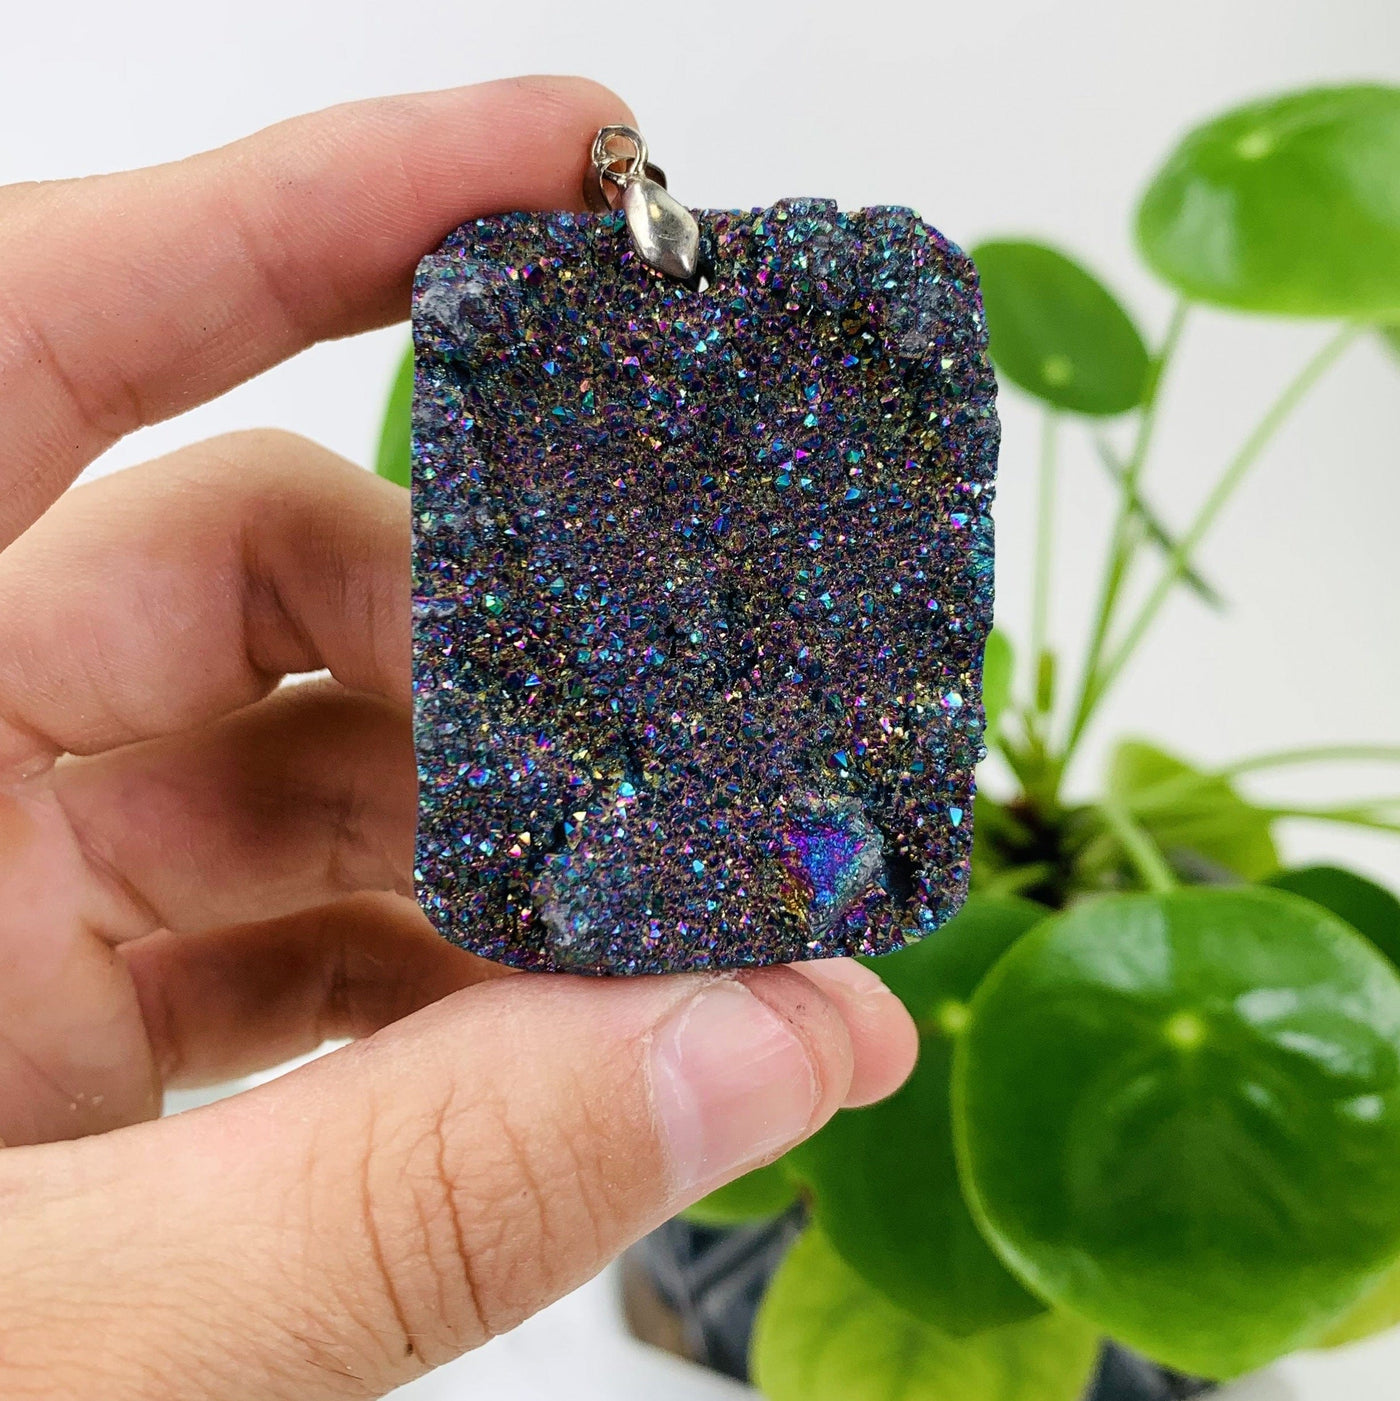 Close up photo to  the largest pendant for this rainbow titanium pendant lot listing. The item is being held for size reference and its also being displayed on a White back ground in front of an all natural green plant.